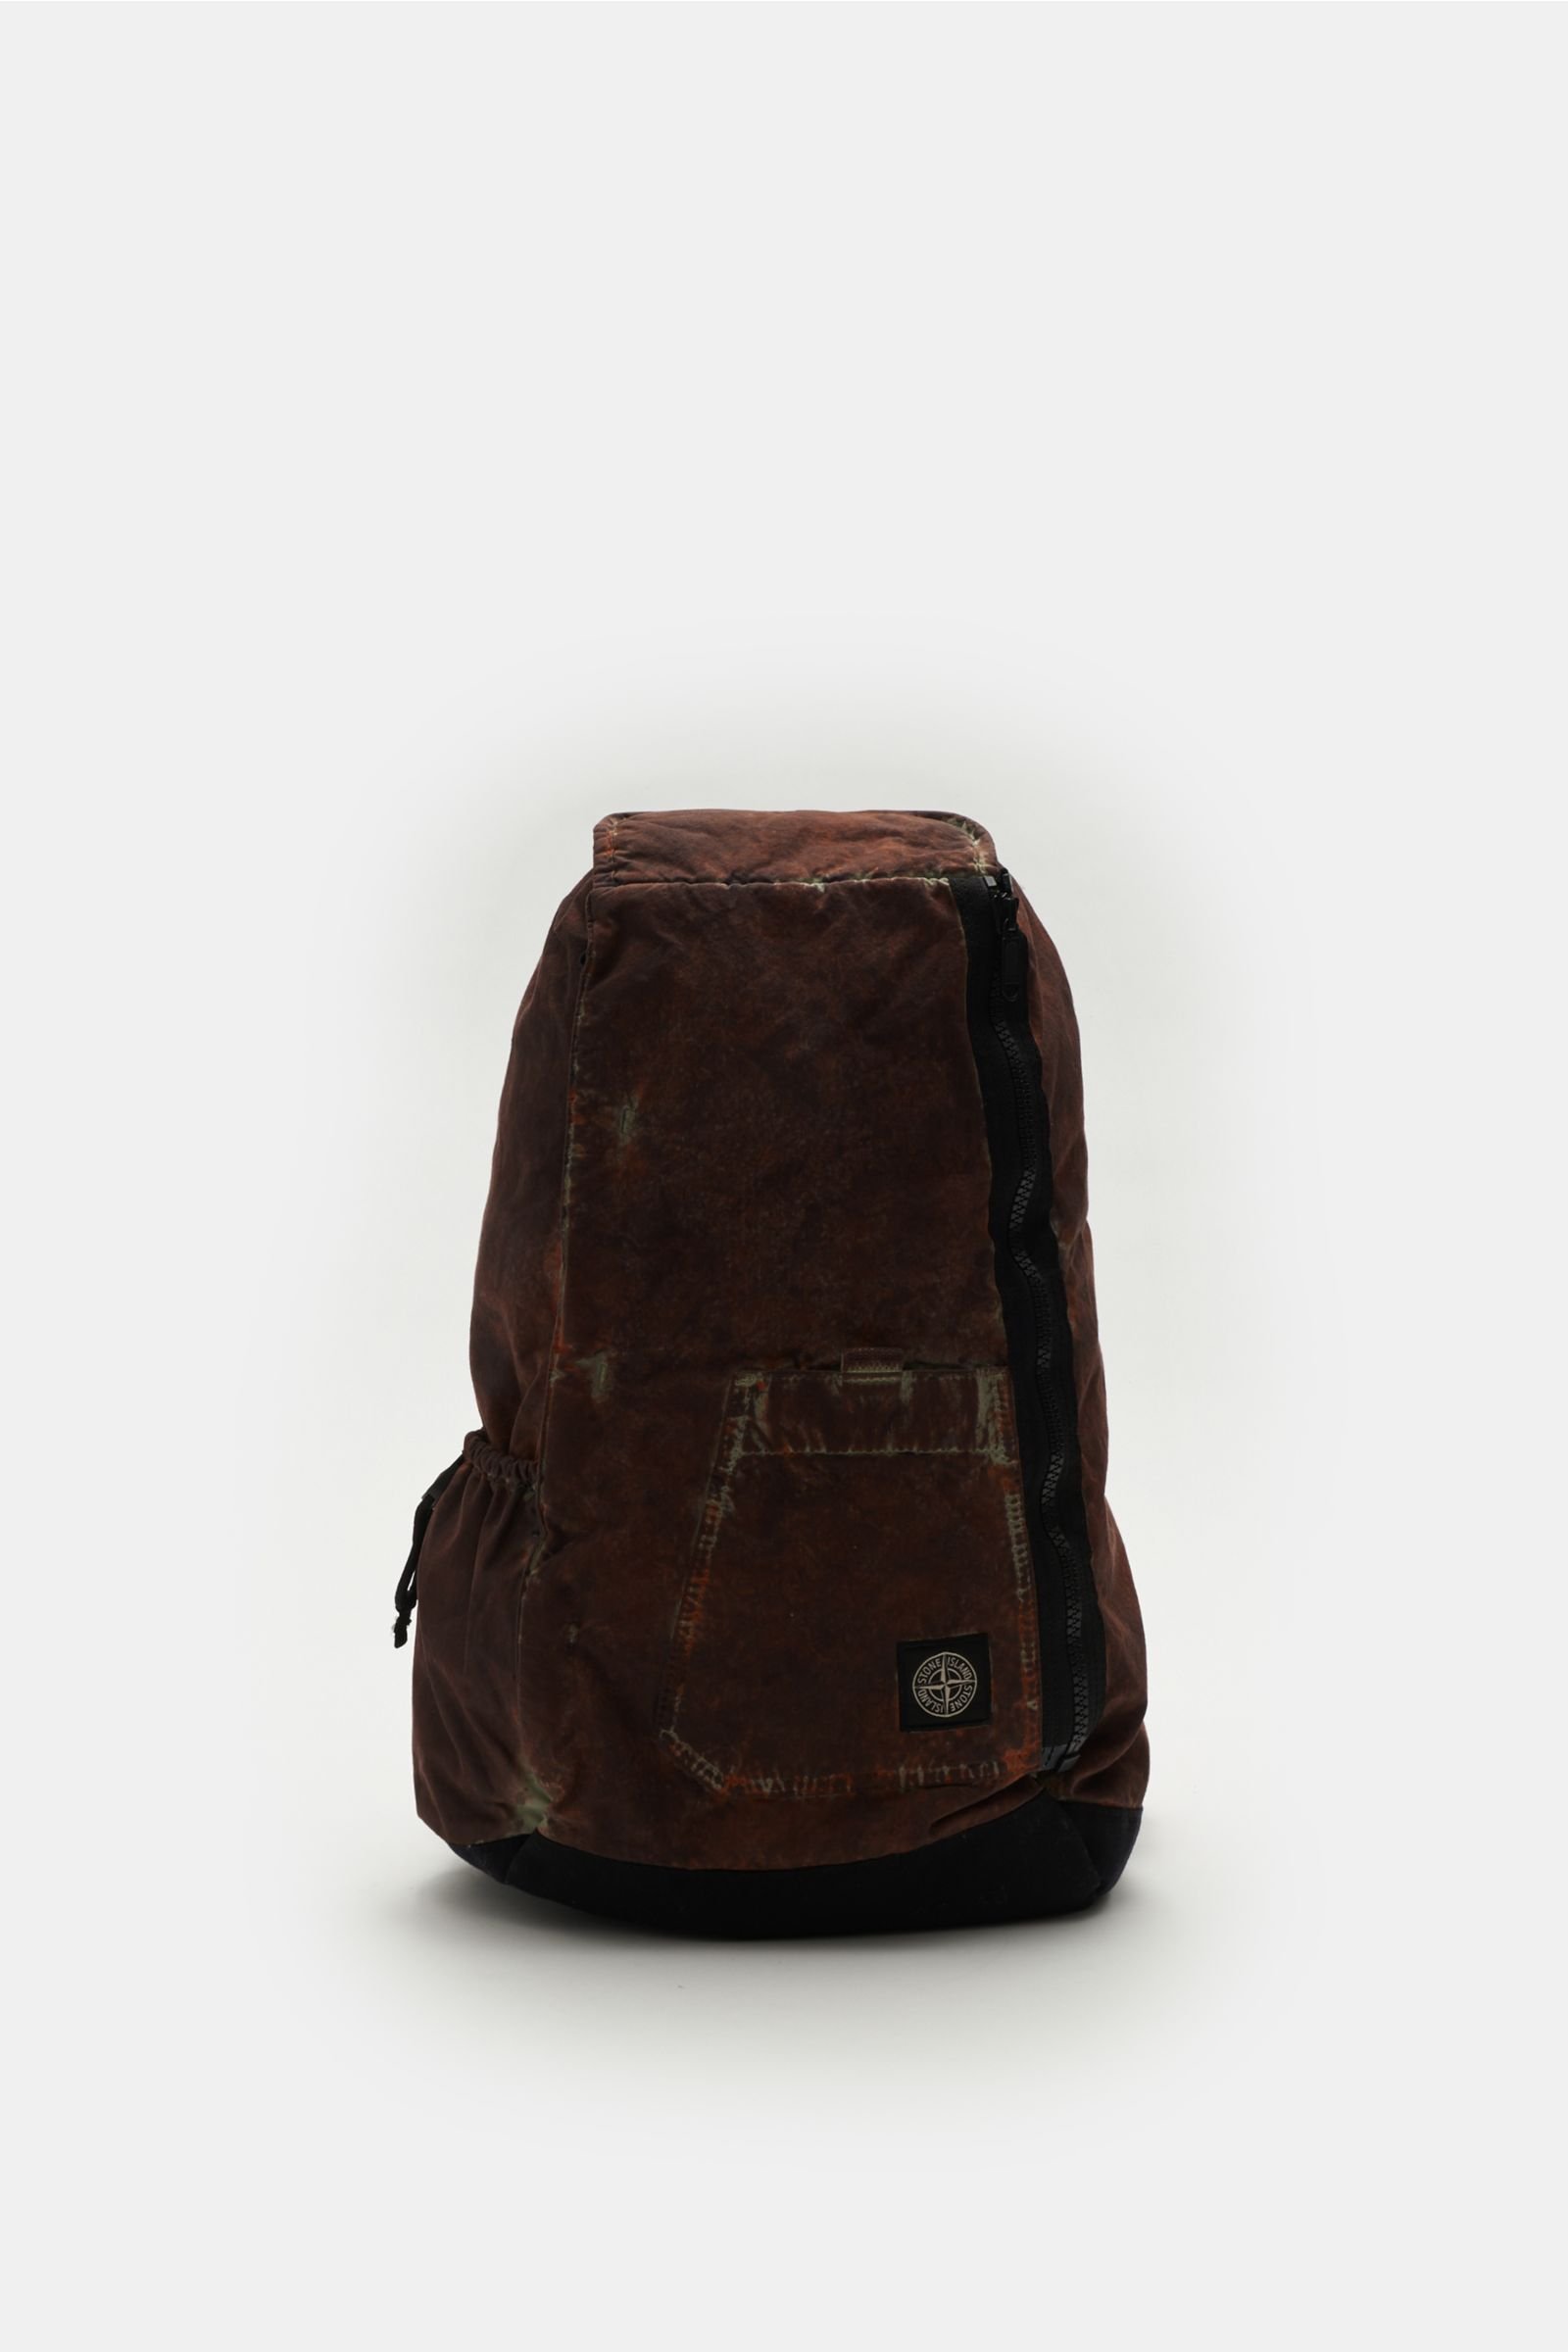 Backpack 'Paintball Camo' rust brown patterned